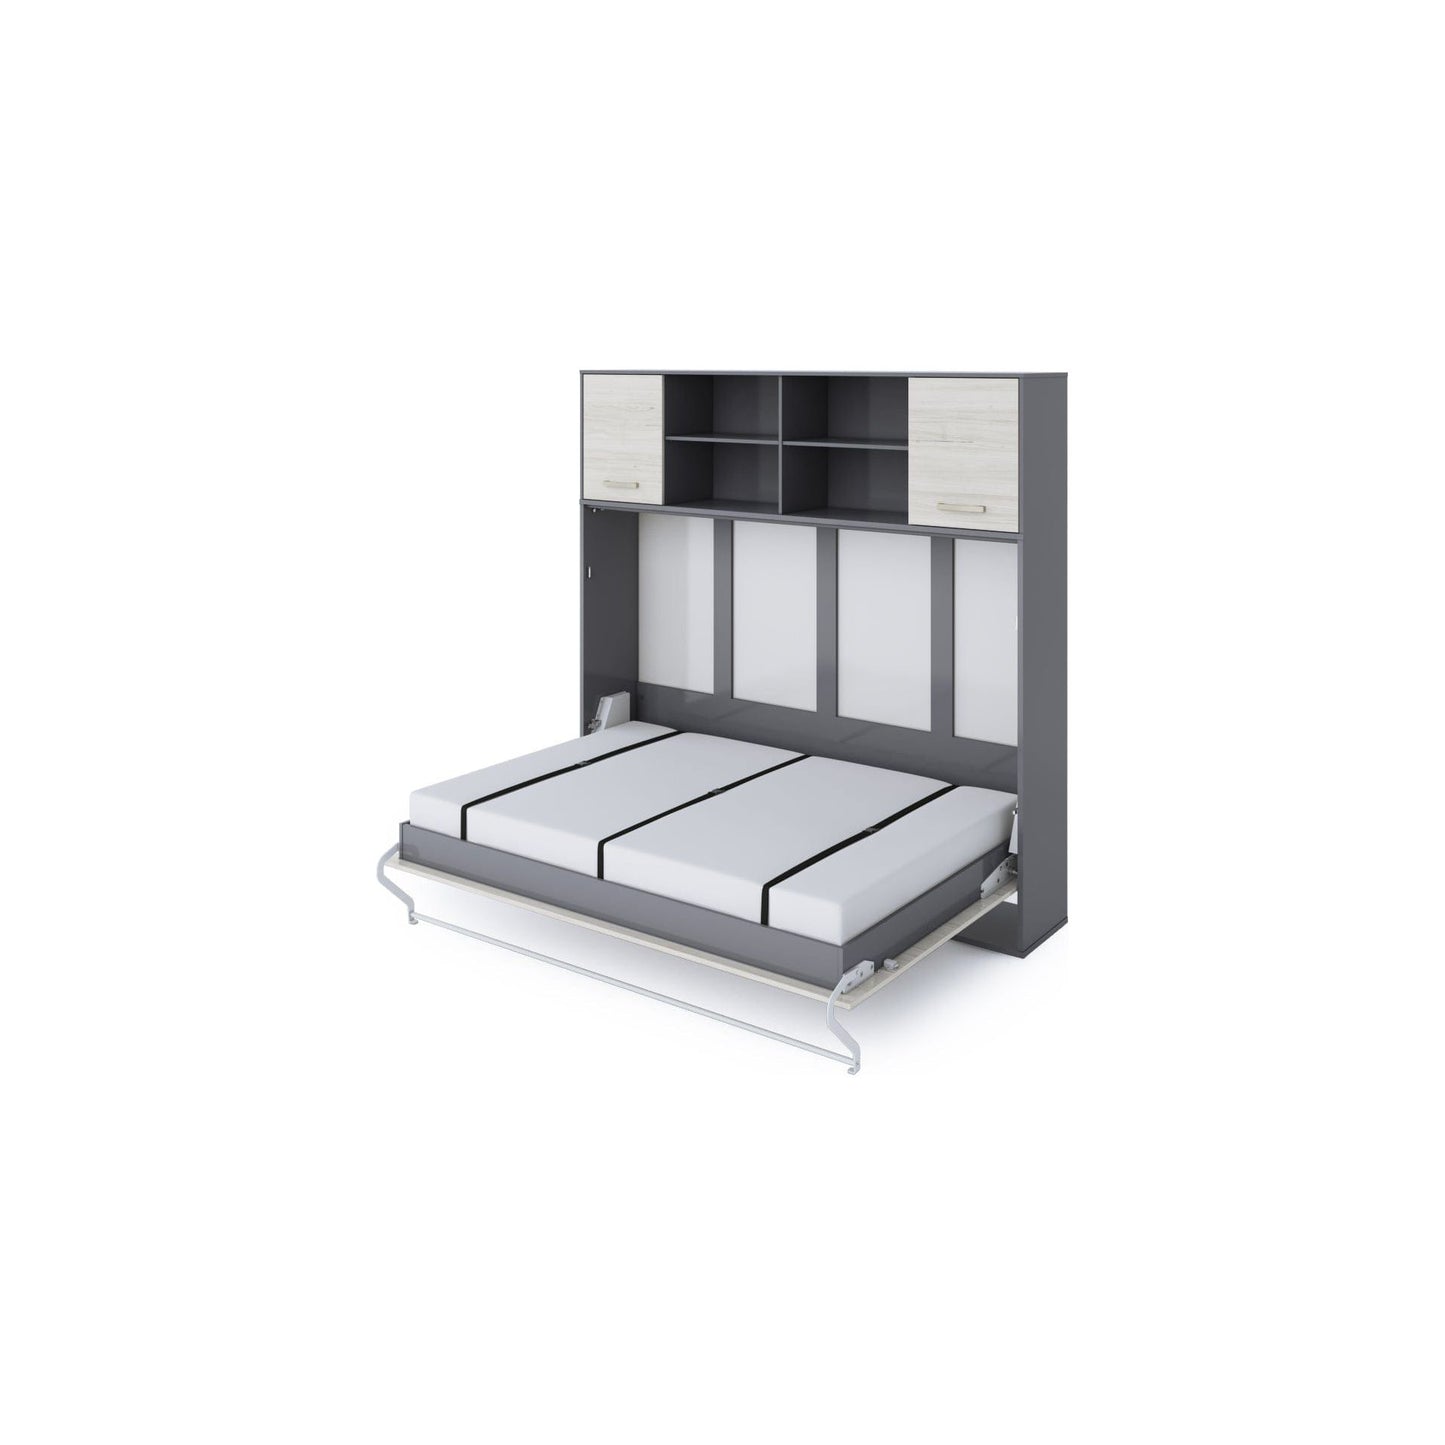 Maxima House Maxima House Invento Horizontal Wall Bed, European Full XL Size with a cabinet on top